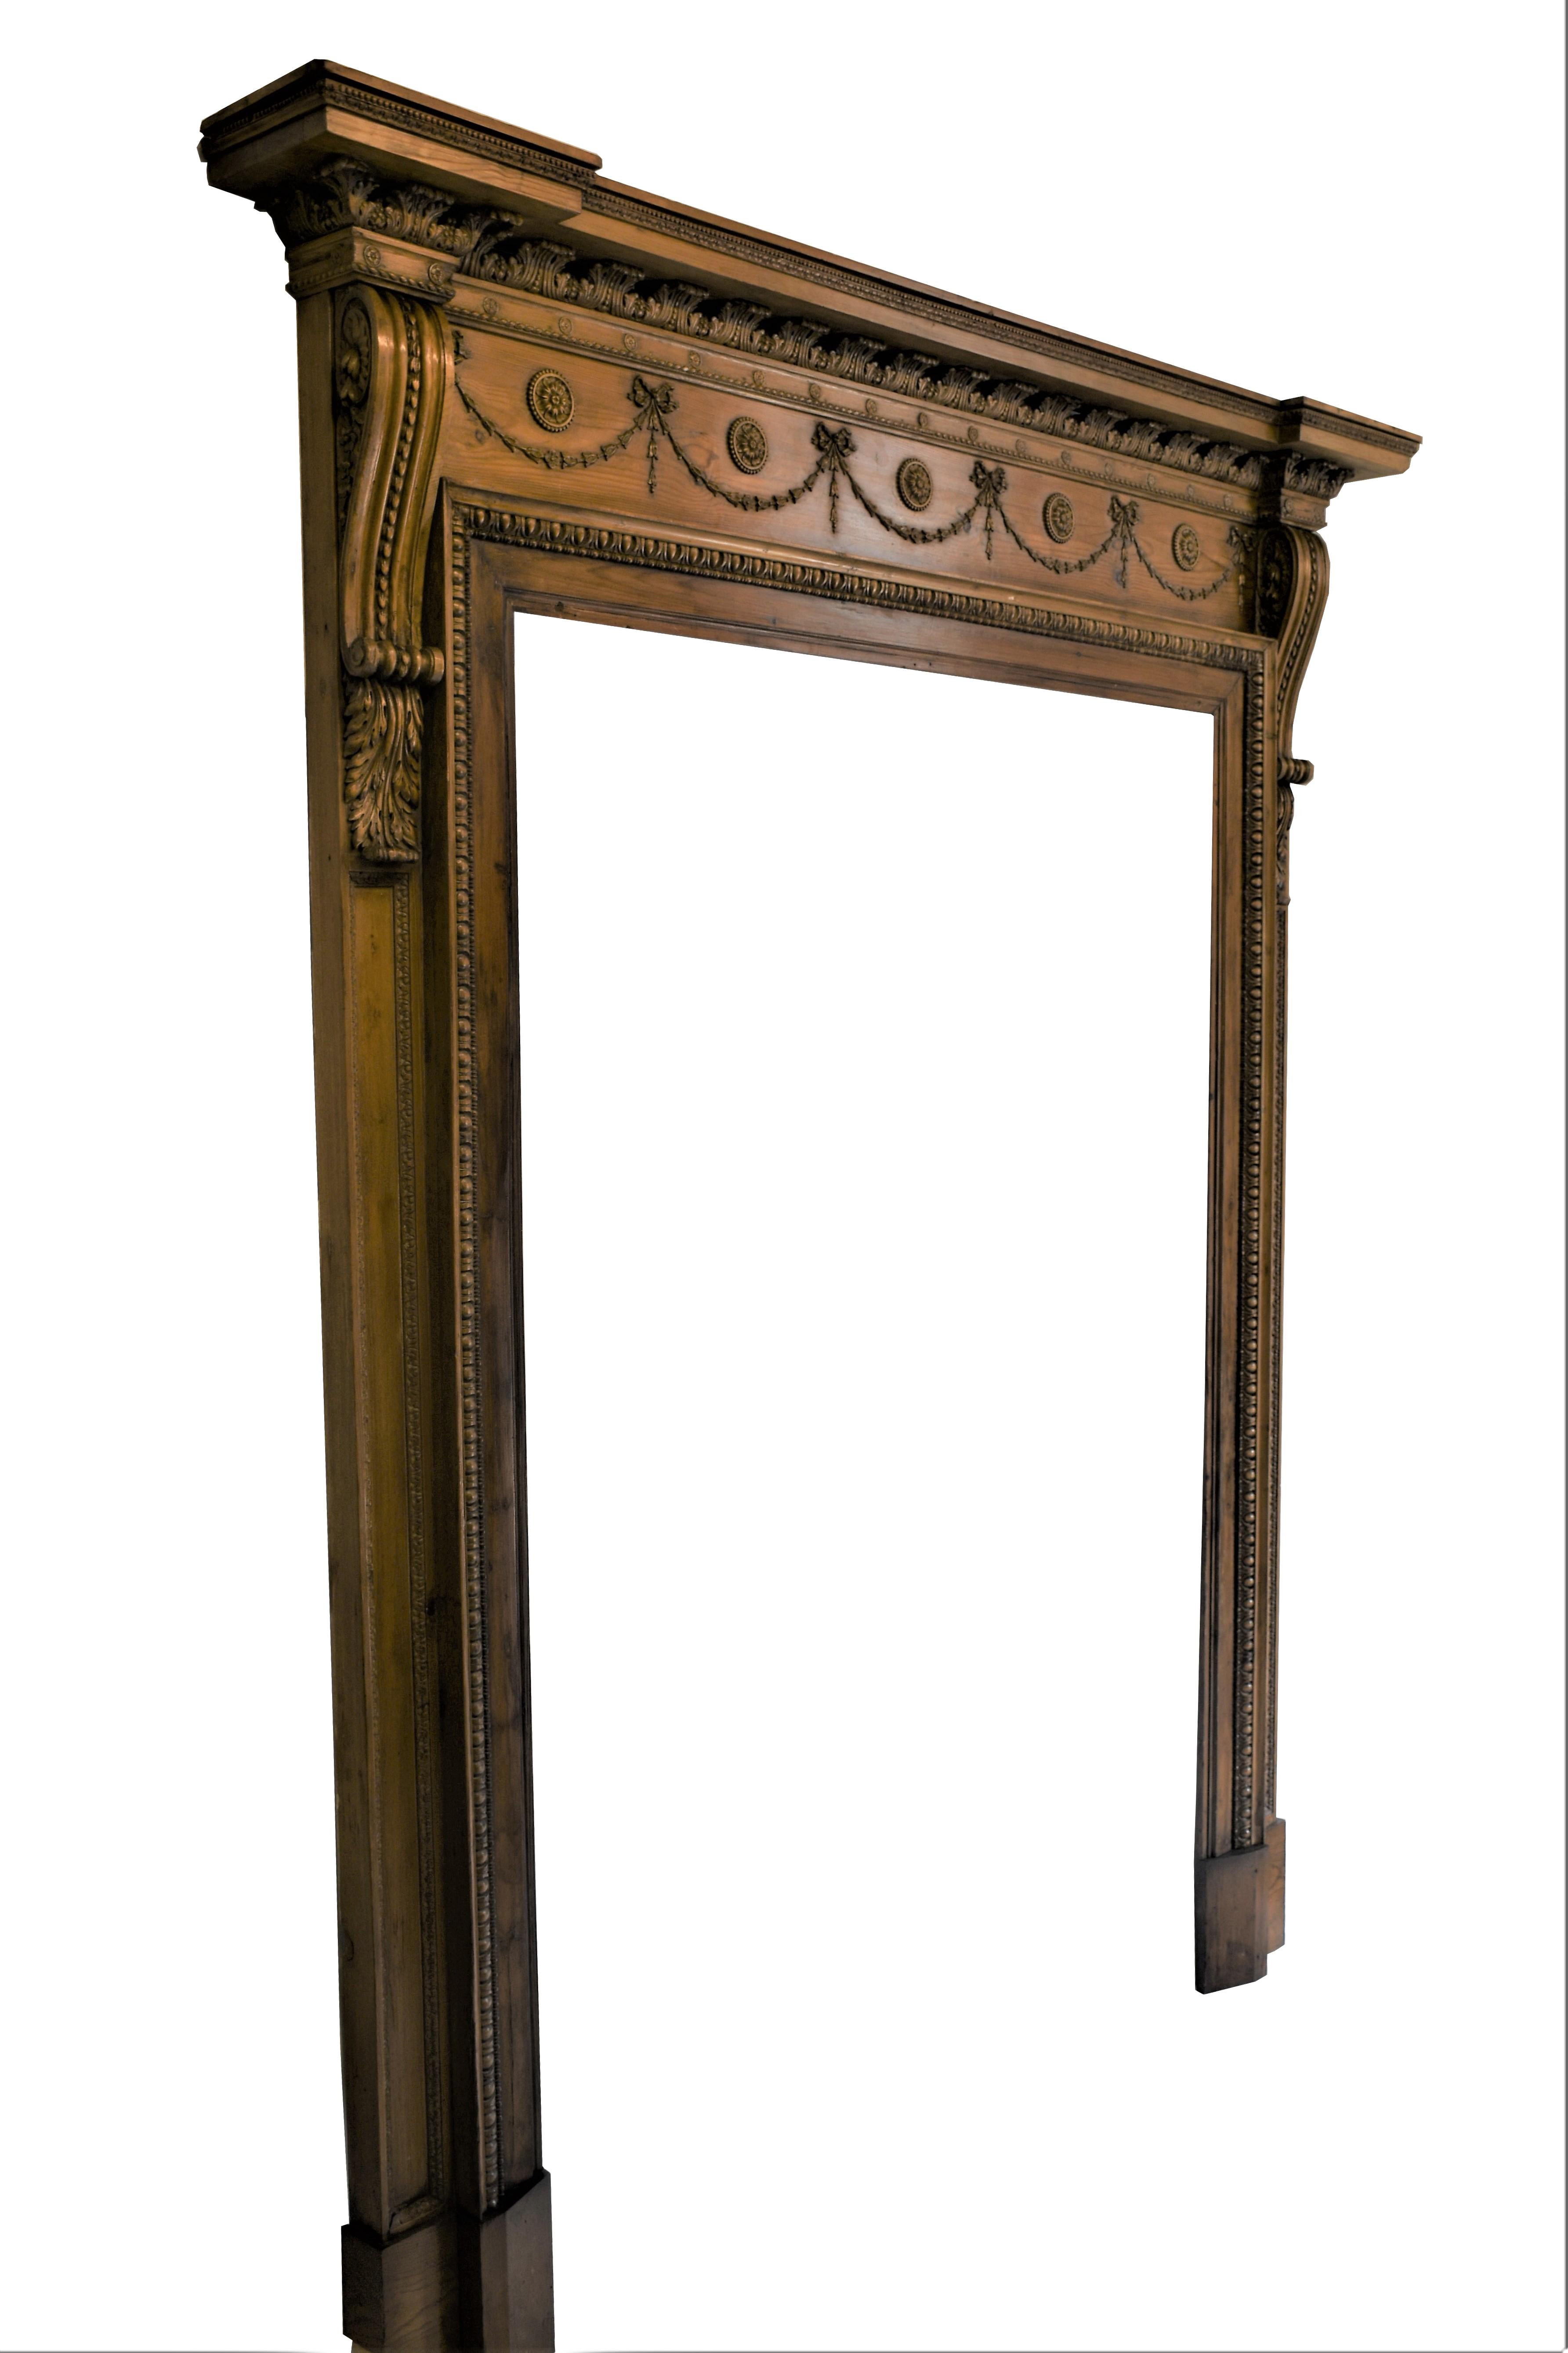 Entrance to Elegance!

A magnificent 18th century (circa 1780) Adam finely carved pine doorway from England. What makes this pieces a true 